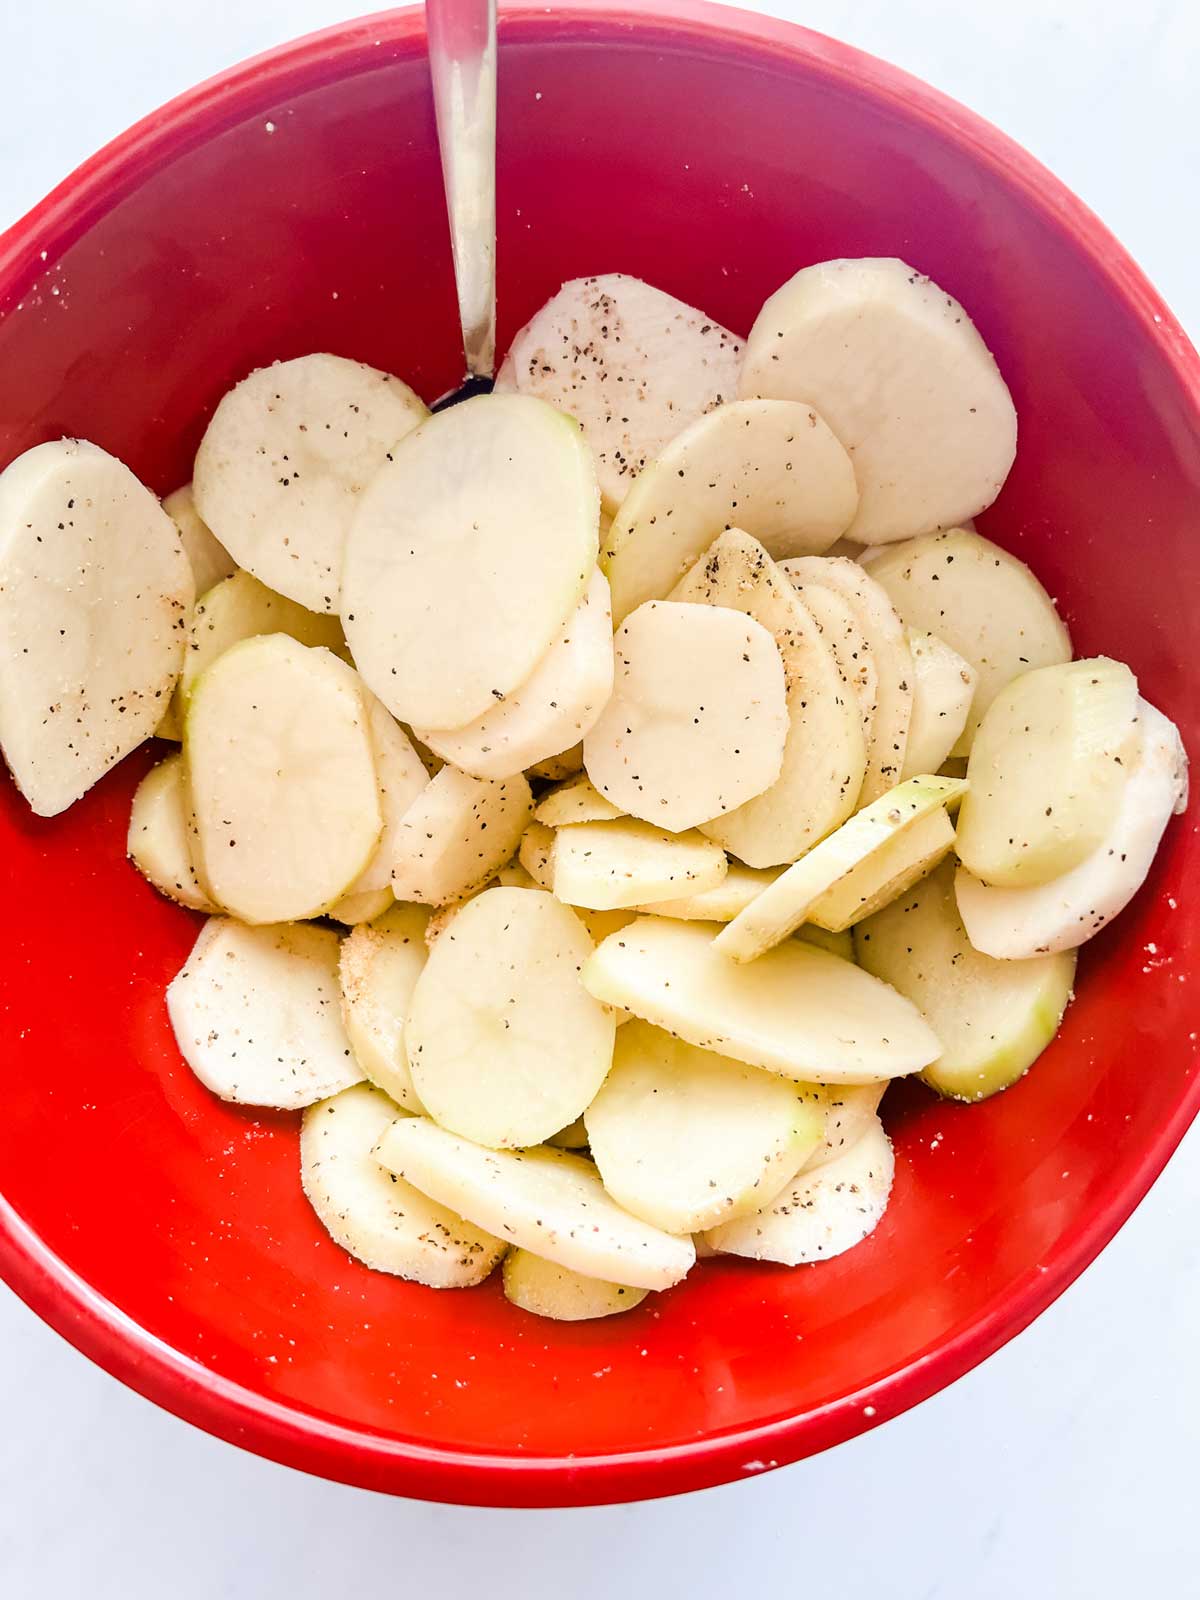 Photo of a red bowl with potatoes that have been tossed in seasonings.